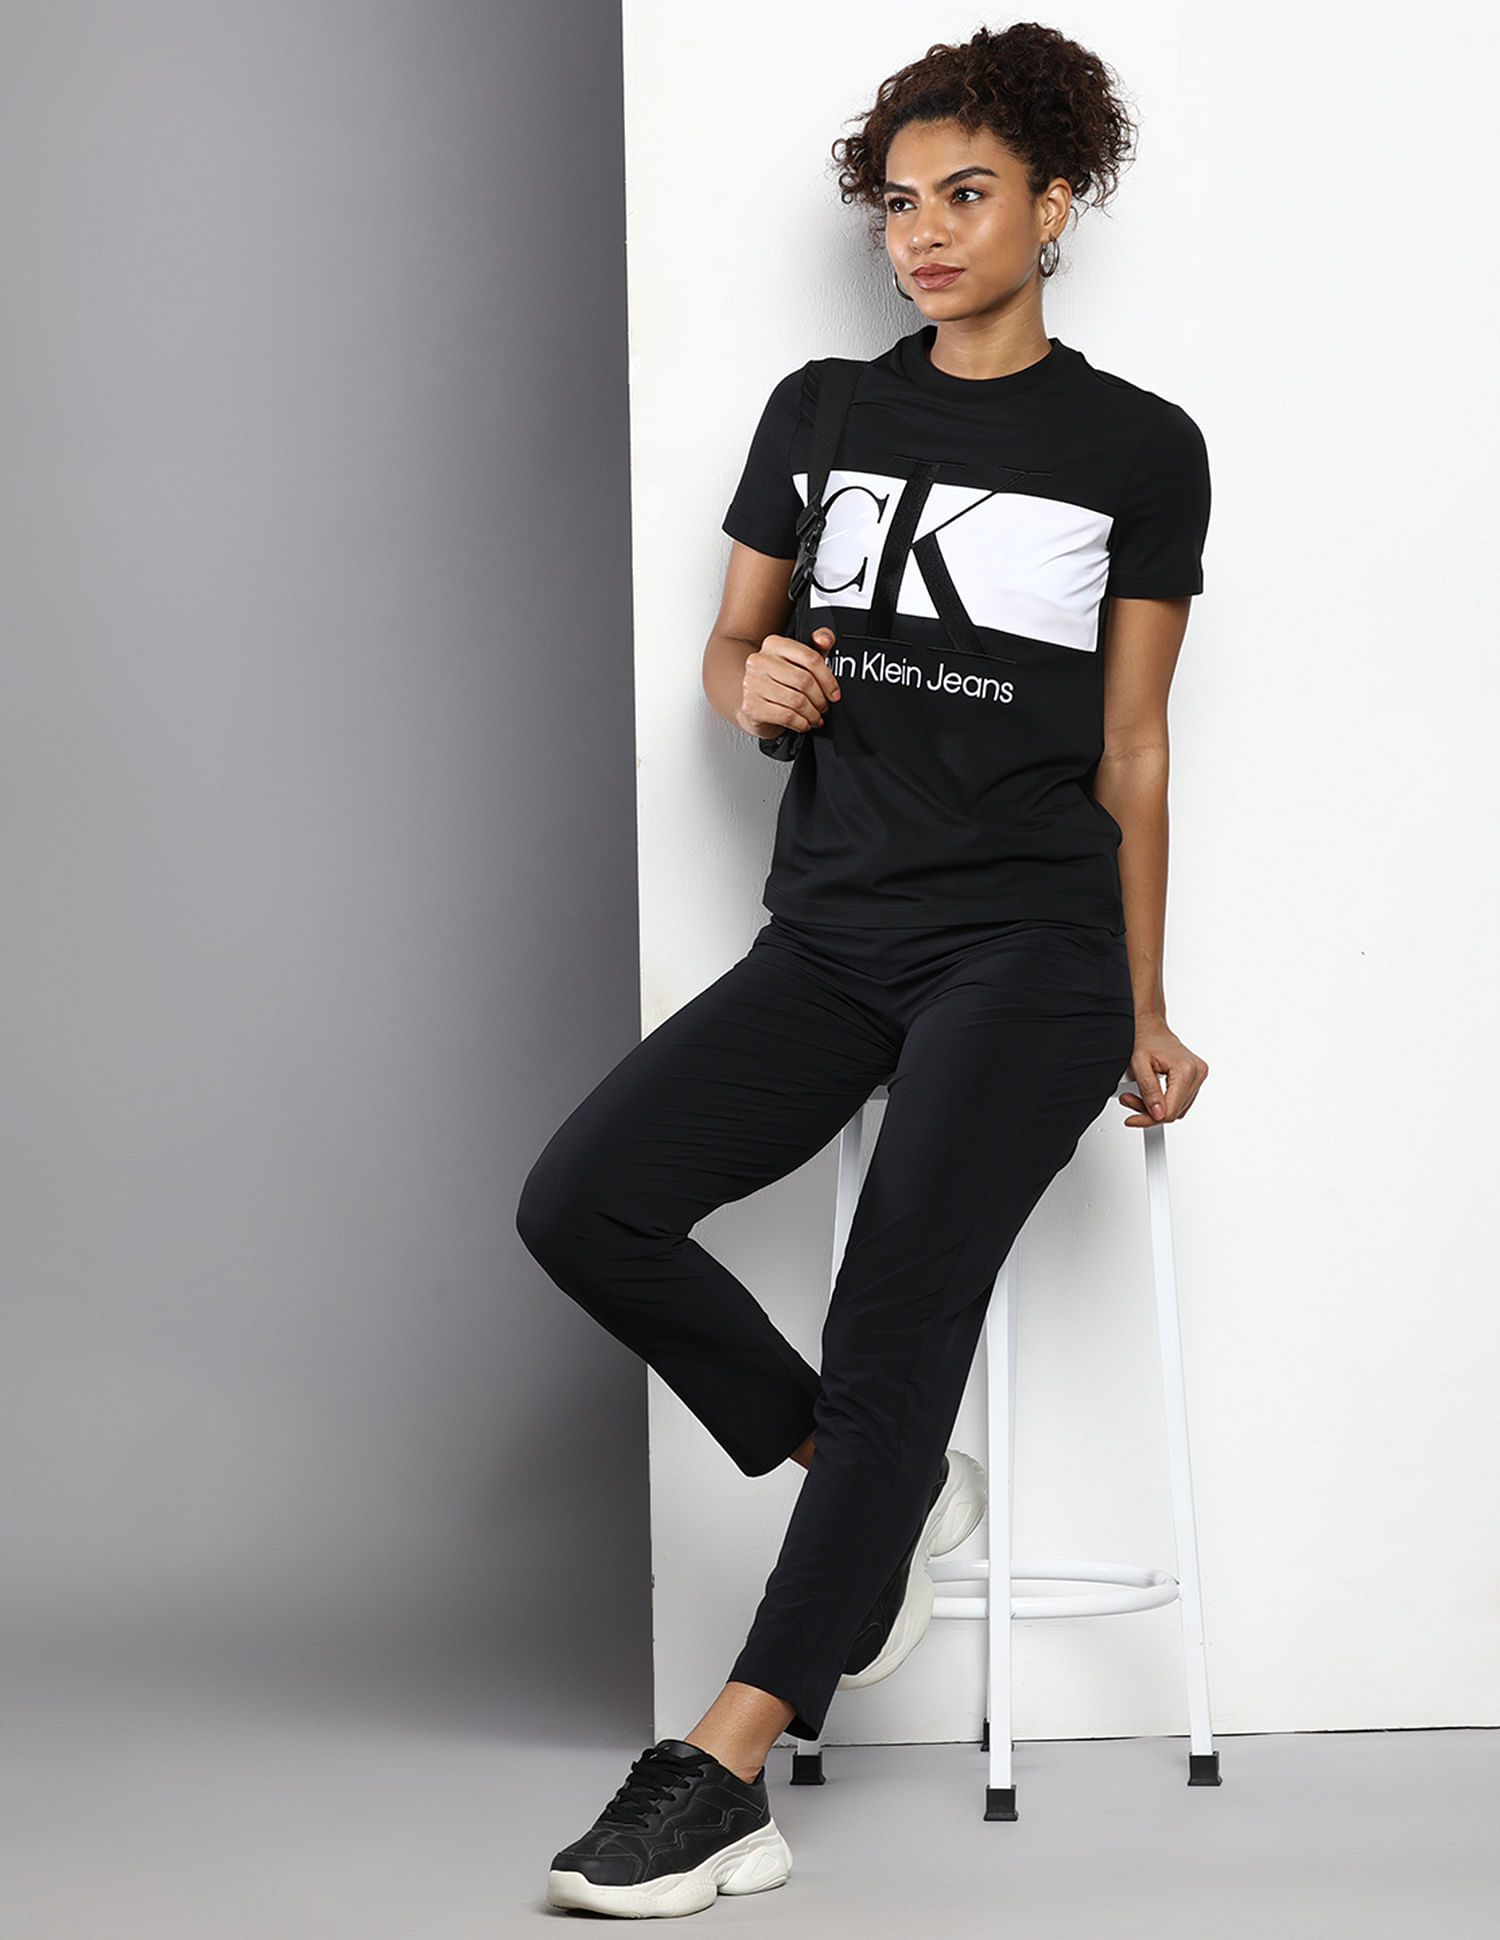 Jeans Embroidered Brand Klein Buy Colour Calvin Block T-Shirt